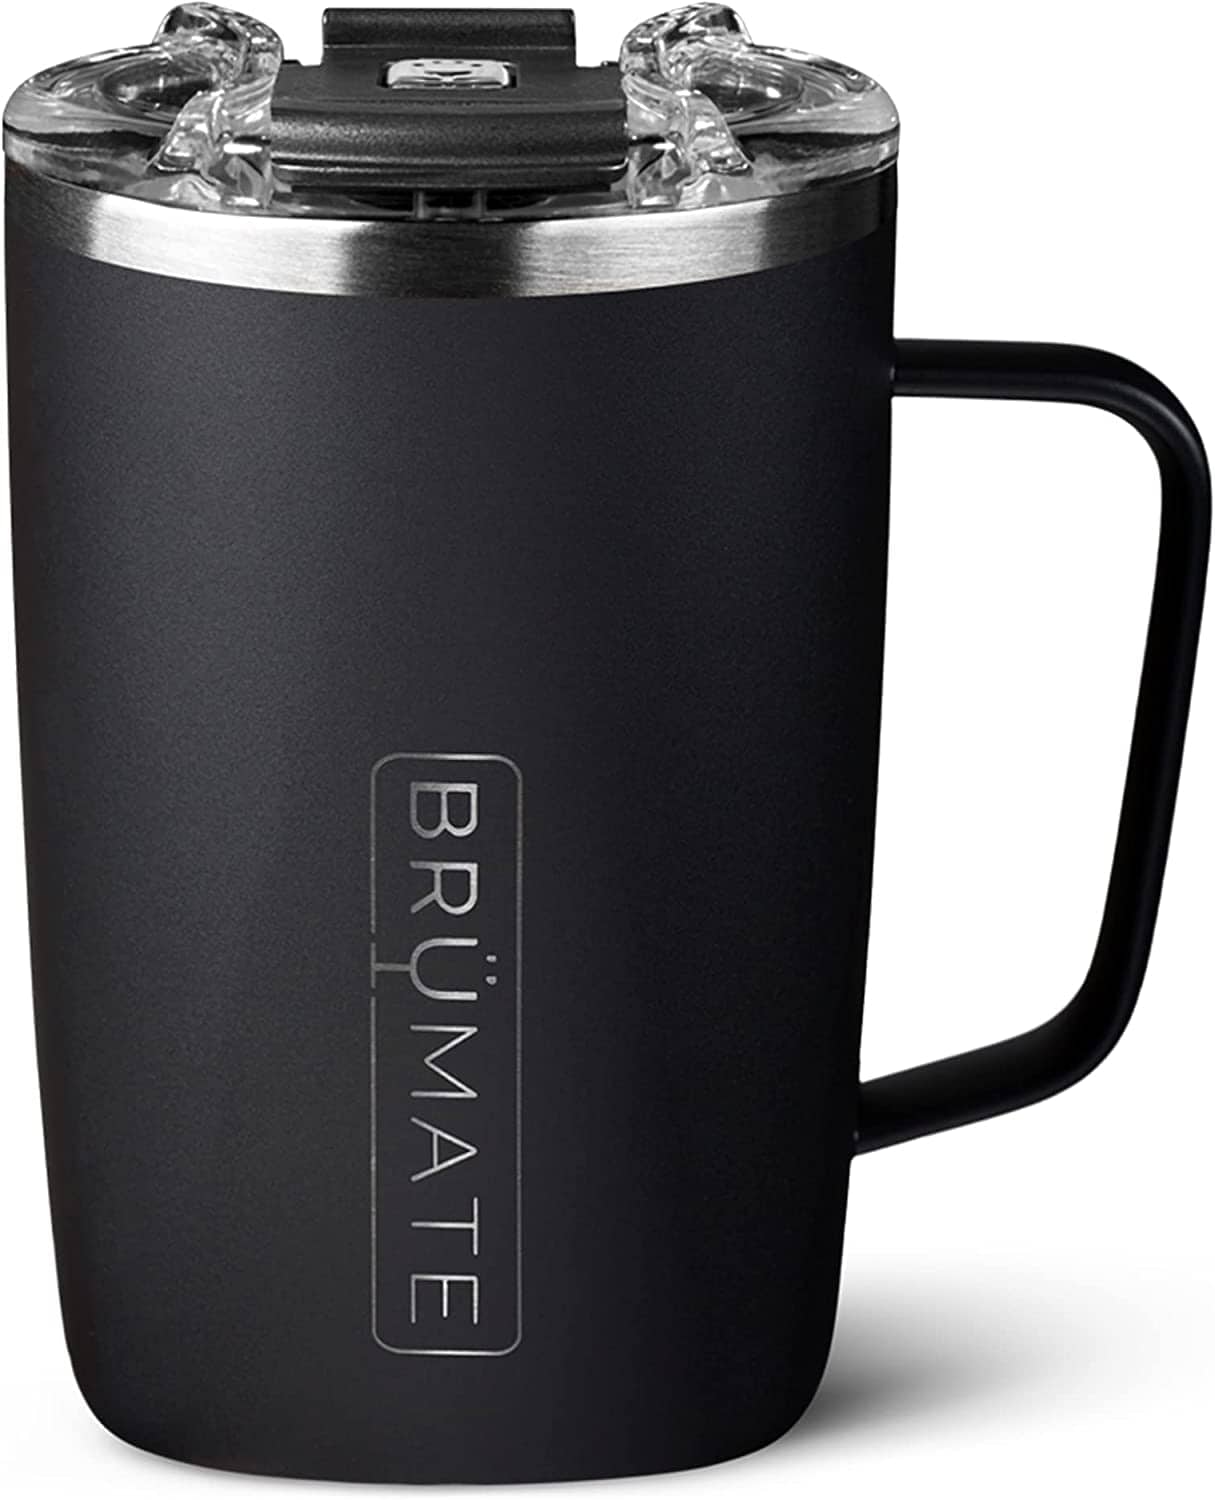 A small black travel coffee mug with leakproof lid.